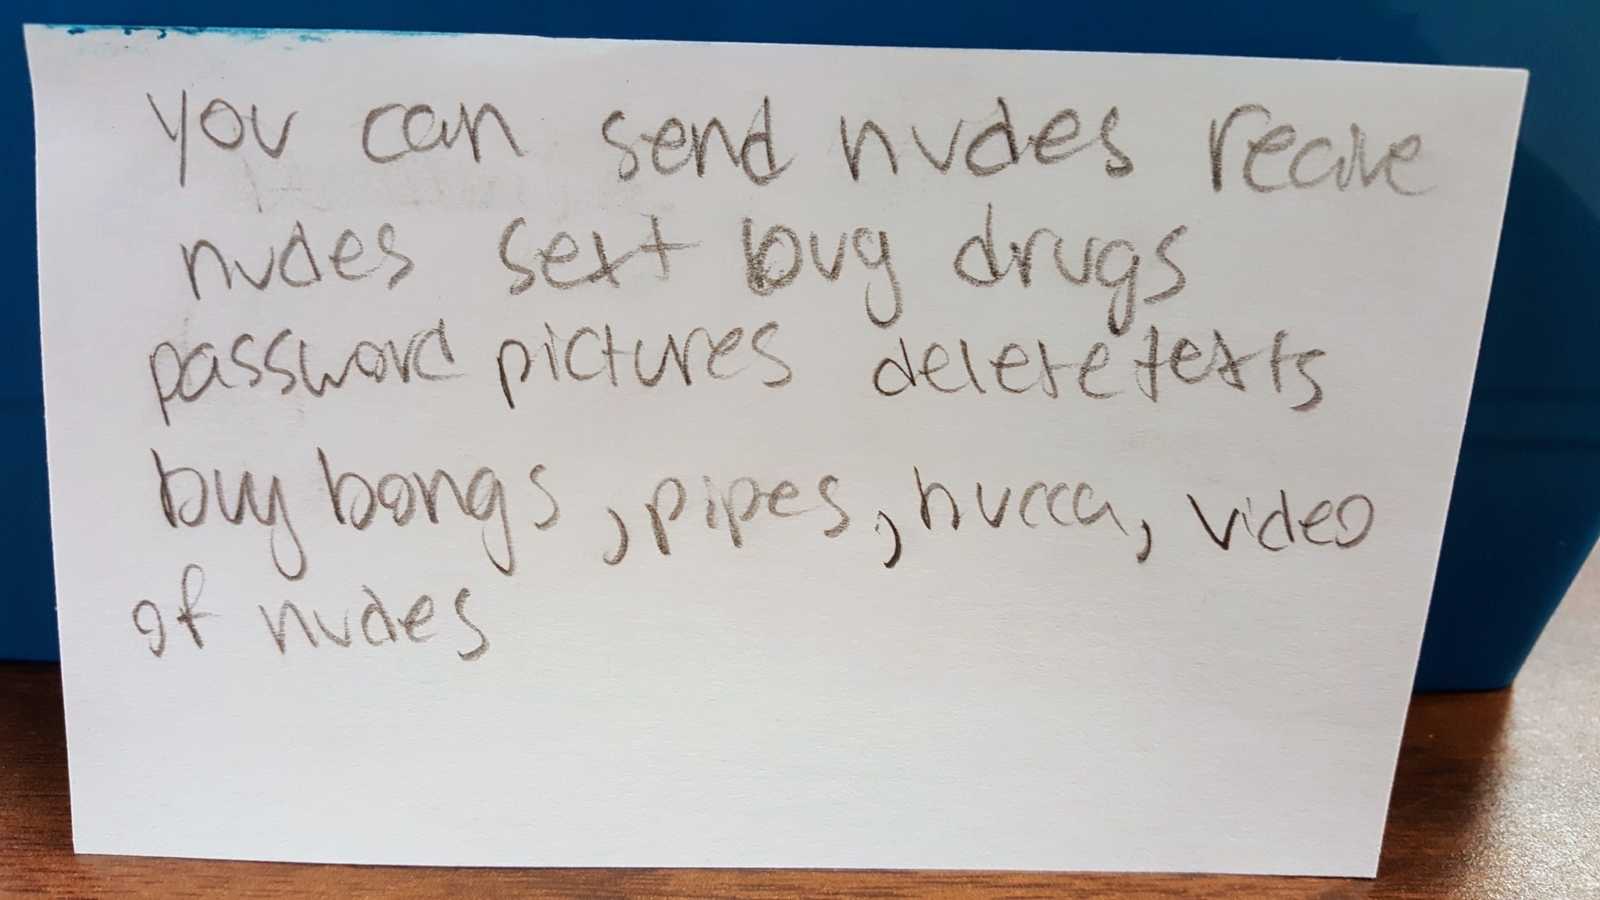 Student writes that parents don't know on social media you can buy drugs and send nudes